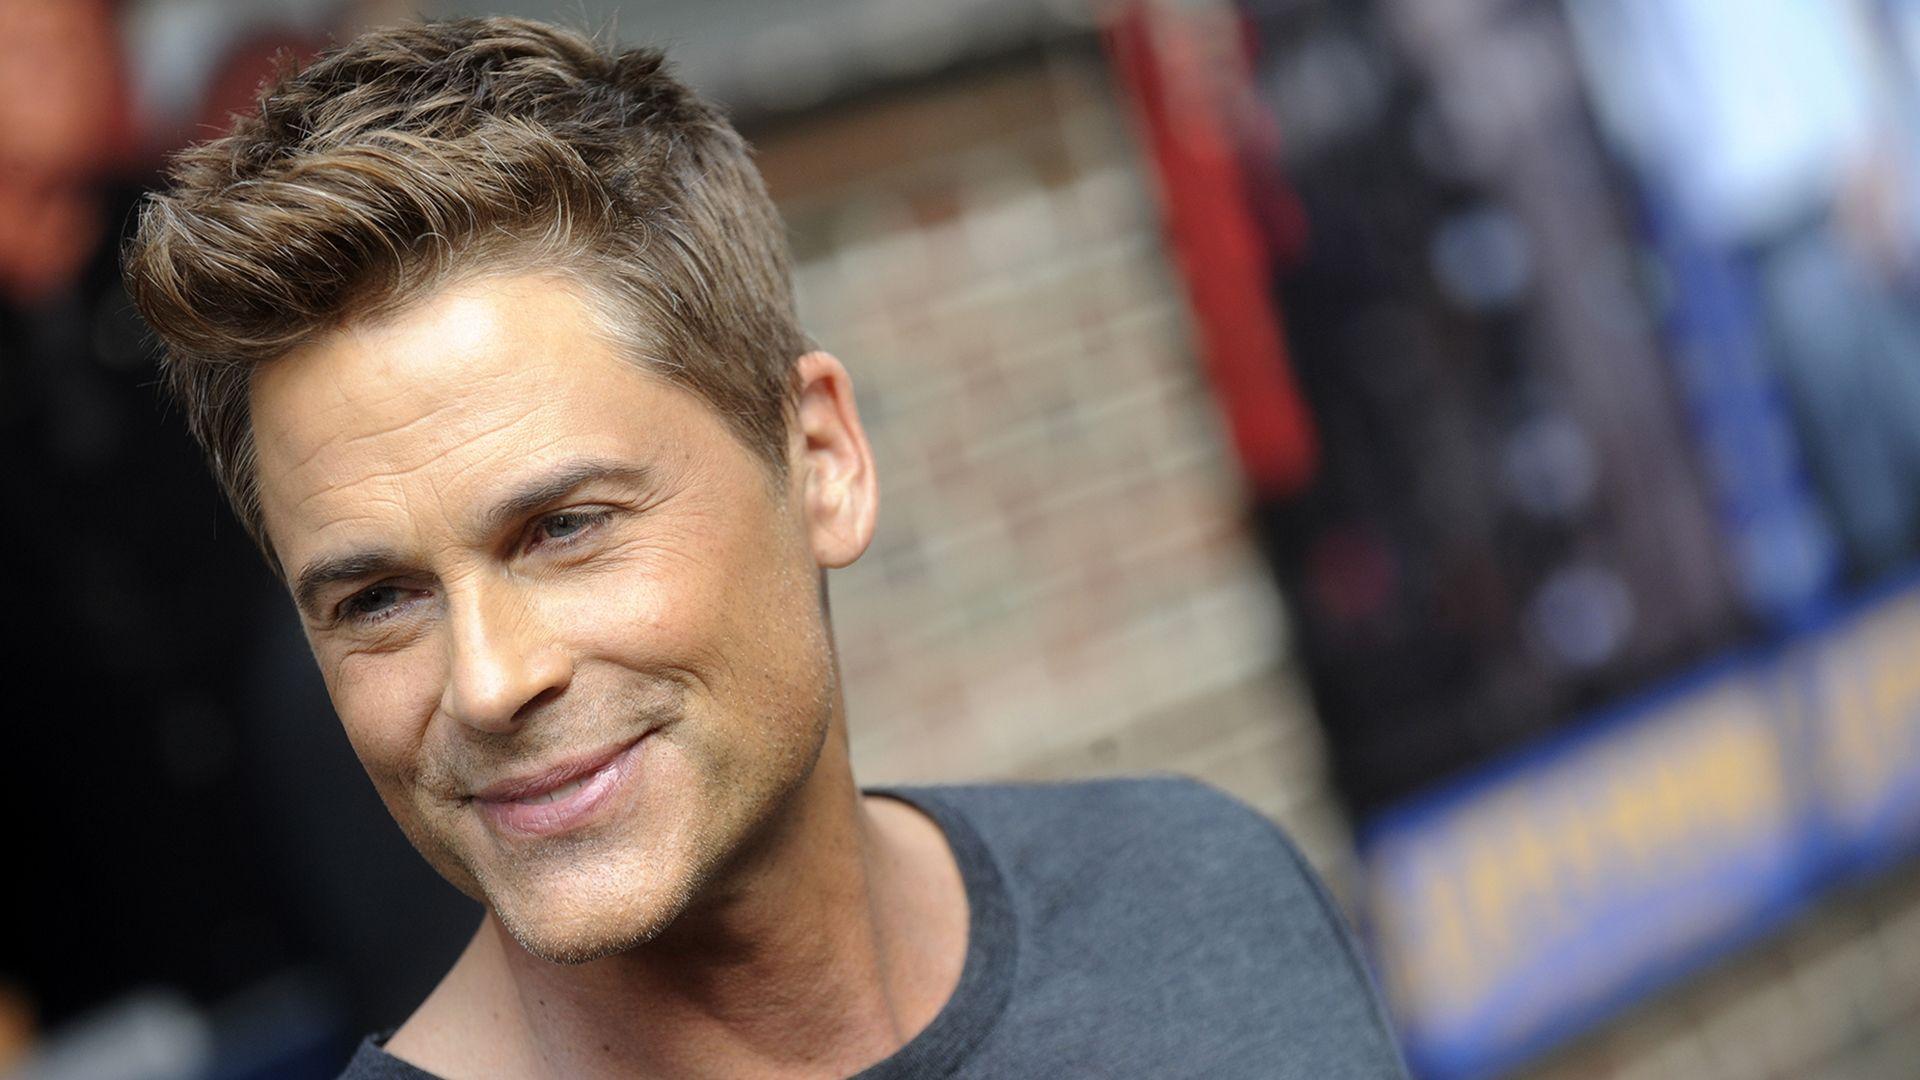 Literally' Alone: Actor Rob Lowe To Debut One Man Show. Lovin' Life